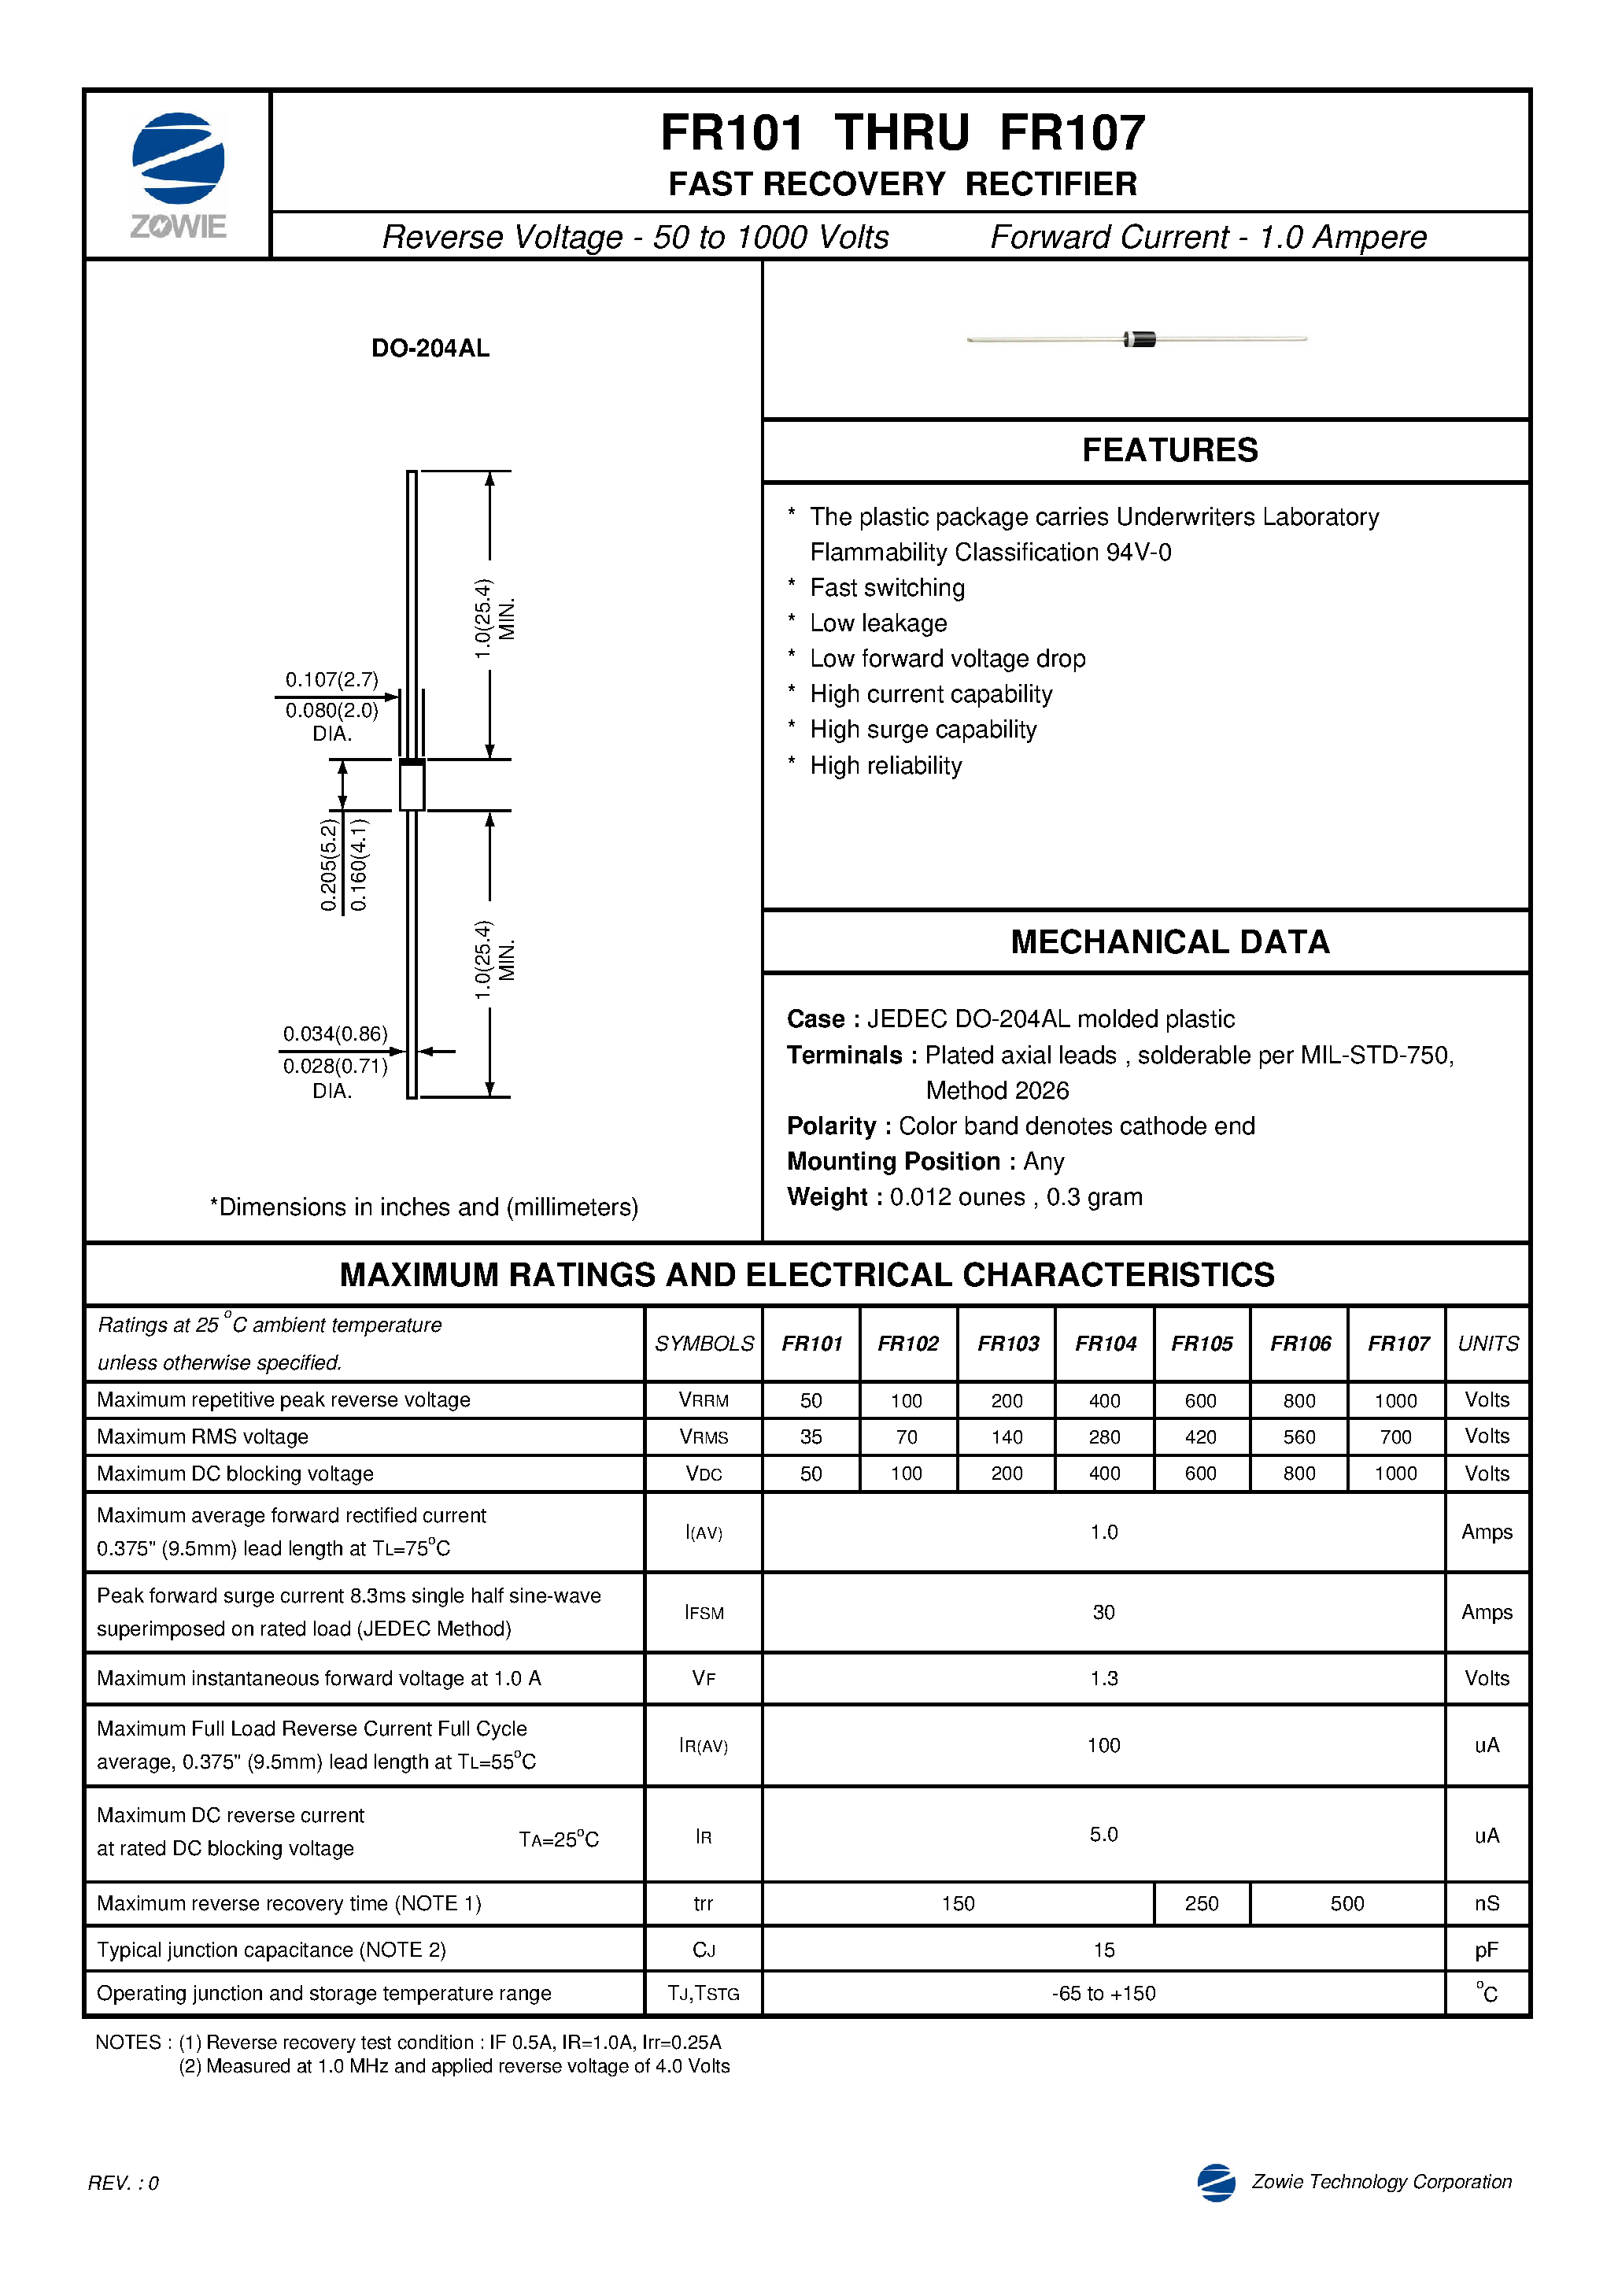 Datasheet FR101 - FAST RECOVERY RECTIFIER page 1